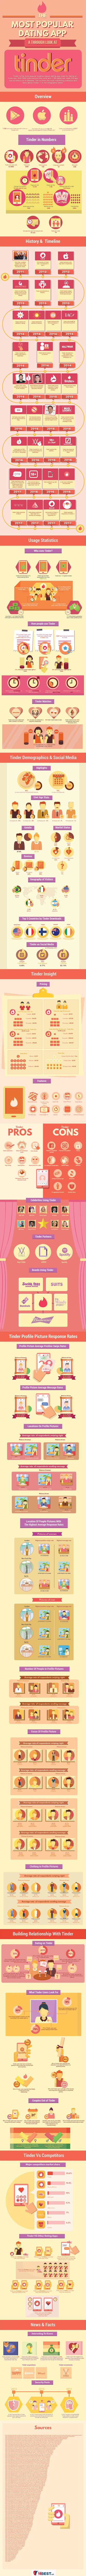 pros and cons of dating on Tinder - infographic